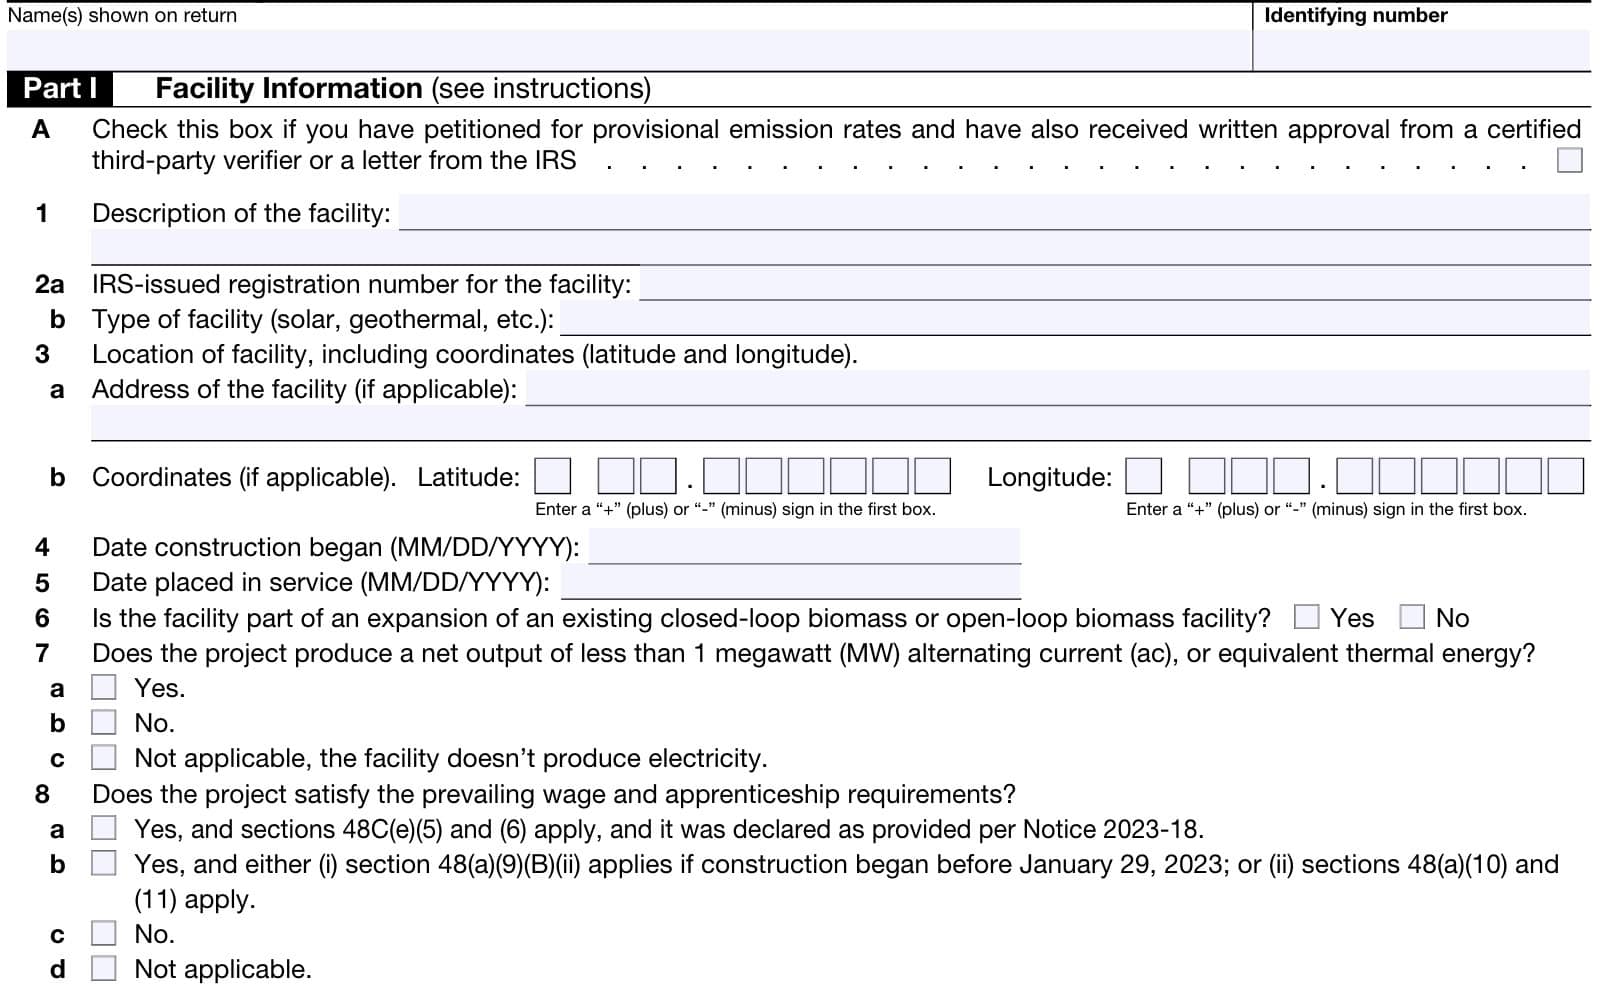 irs form 3468, part i: facility information, lines 1 through 8